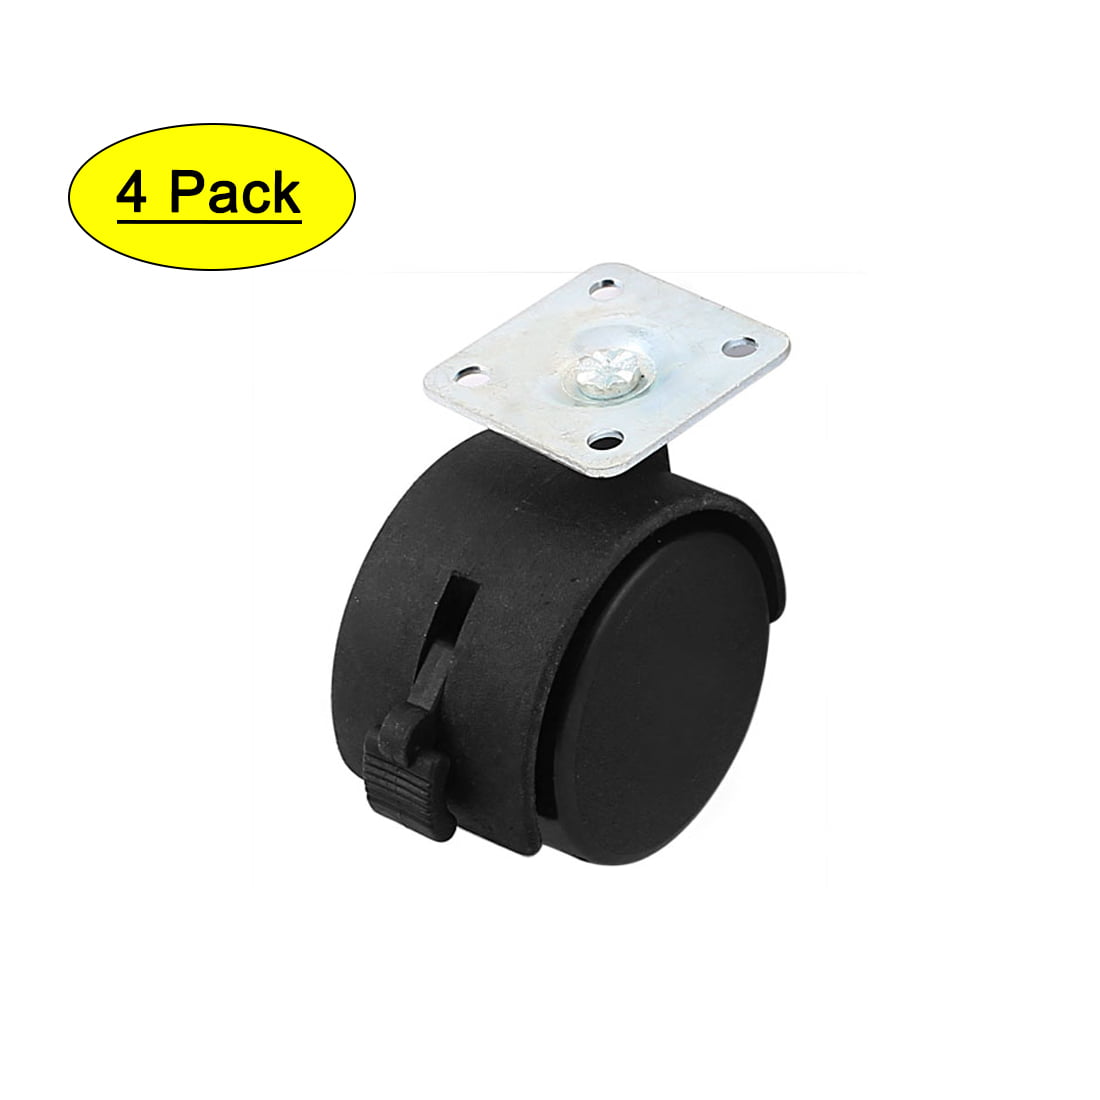 Fixed Casters 2inch Nylon Top Plate Mounted Wheels White 66lb Capacity 2pcs 714998383495 